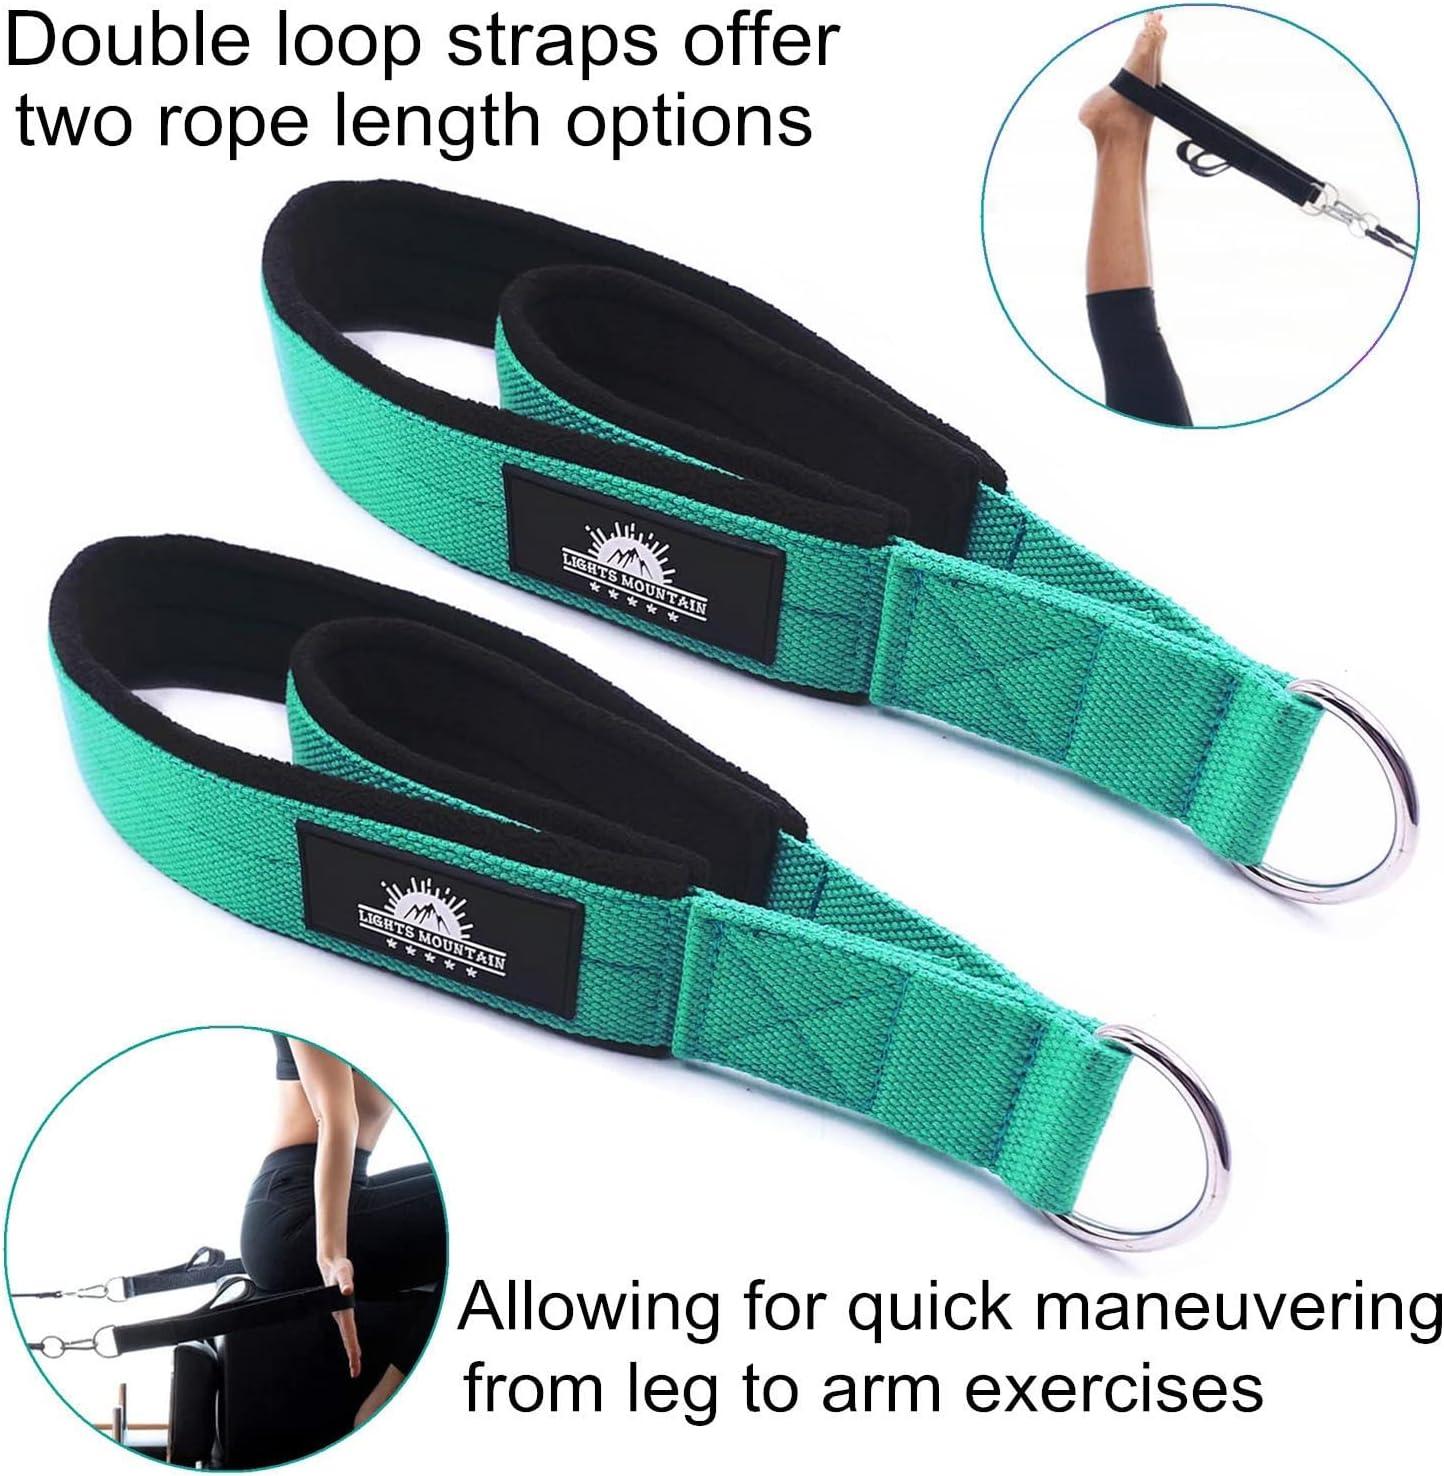 Lights Mountain 1 Pair Pilates Double Loop Straps for Reformer Fitness  D-Ring Straps Handle, Yoga Exercise Accessories for Home Gym Workout  lakegreen size M